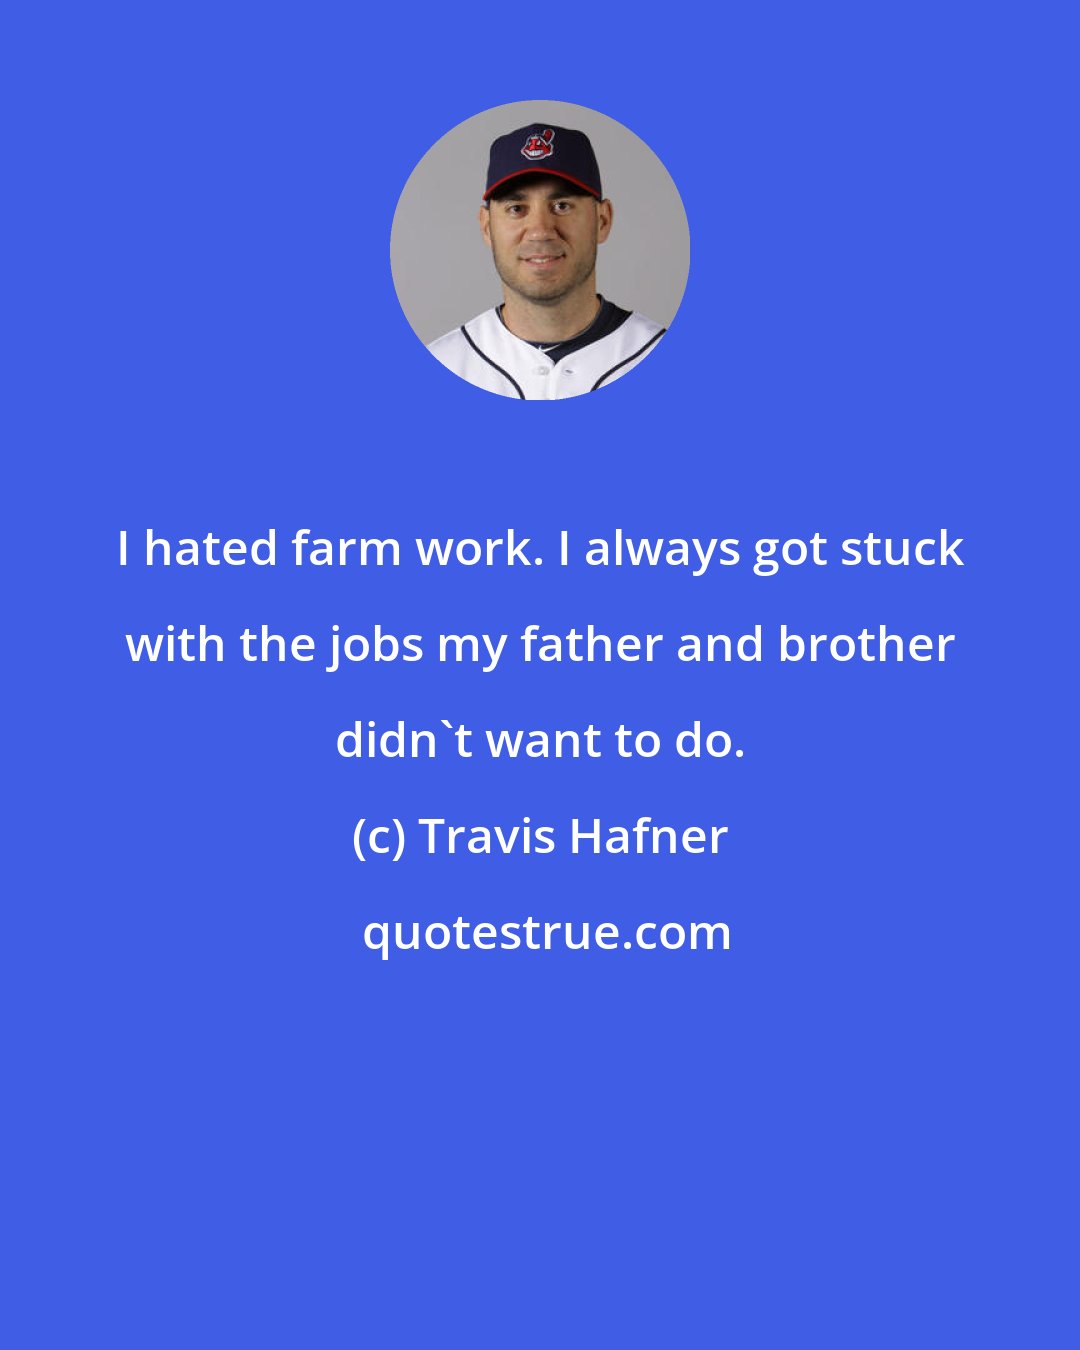 Travis Hafner: I hated farm work. I always got stuck with the jobs my father and brother didn't want to do.